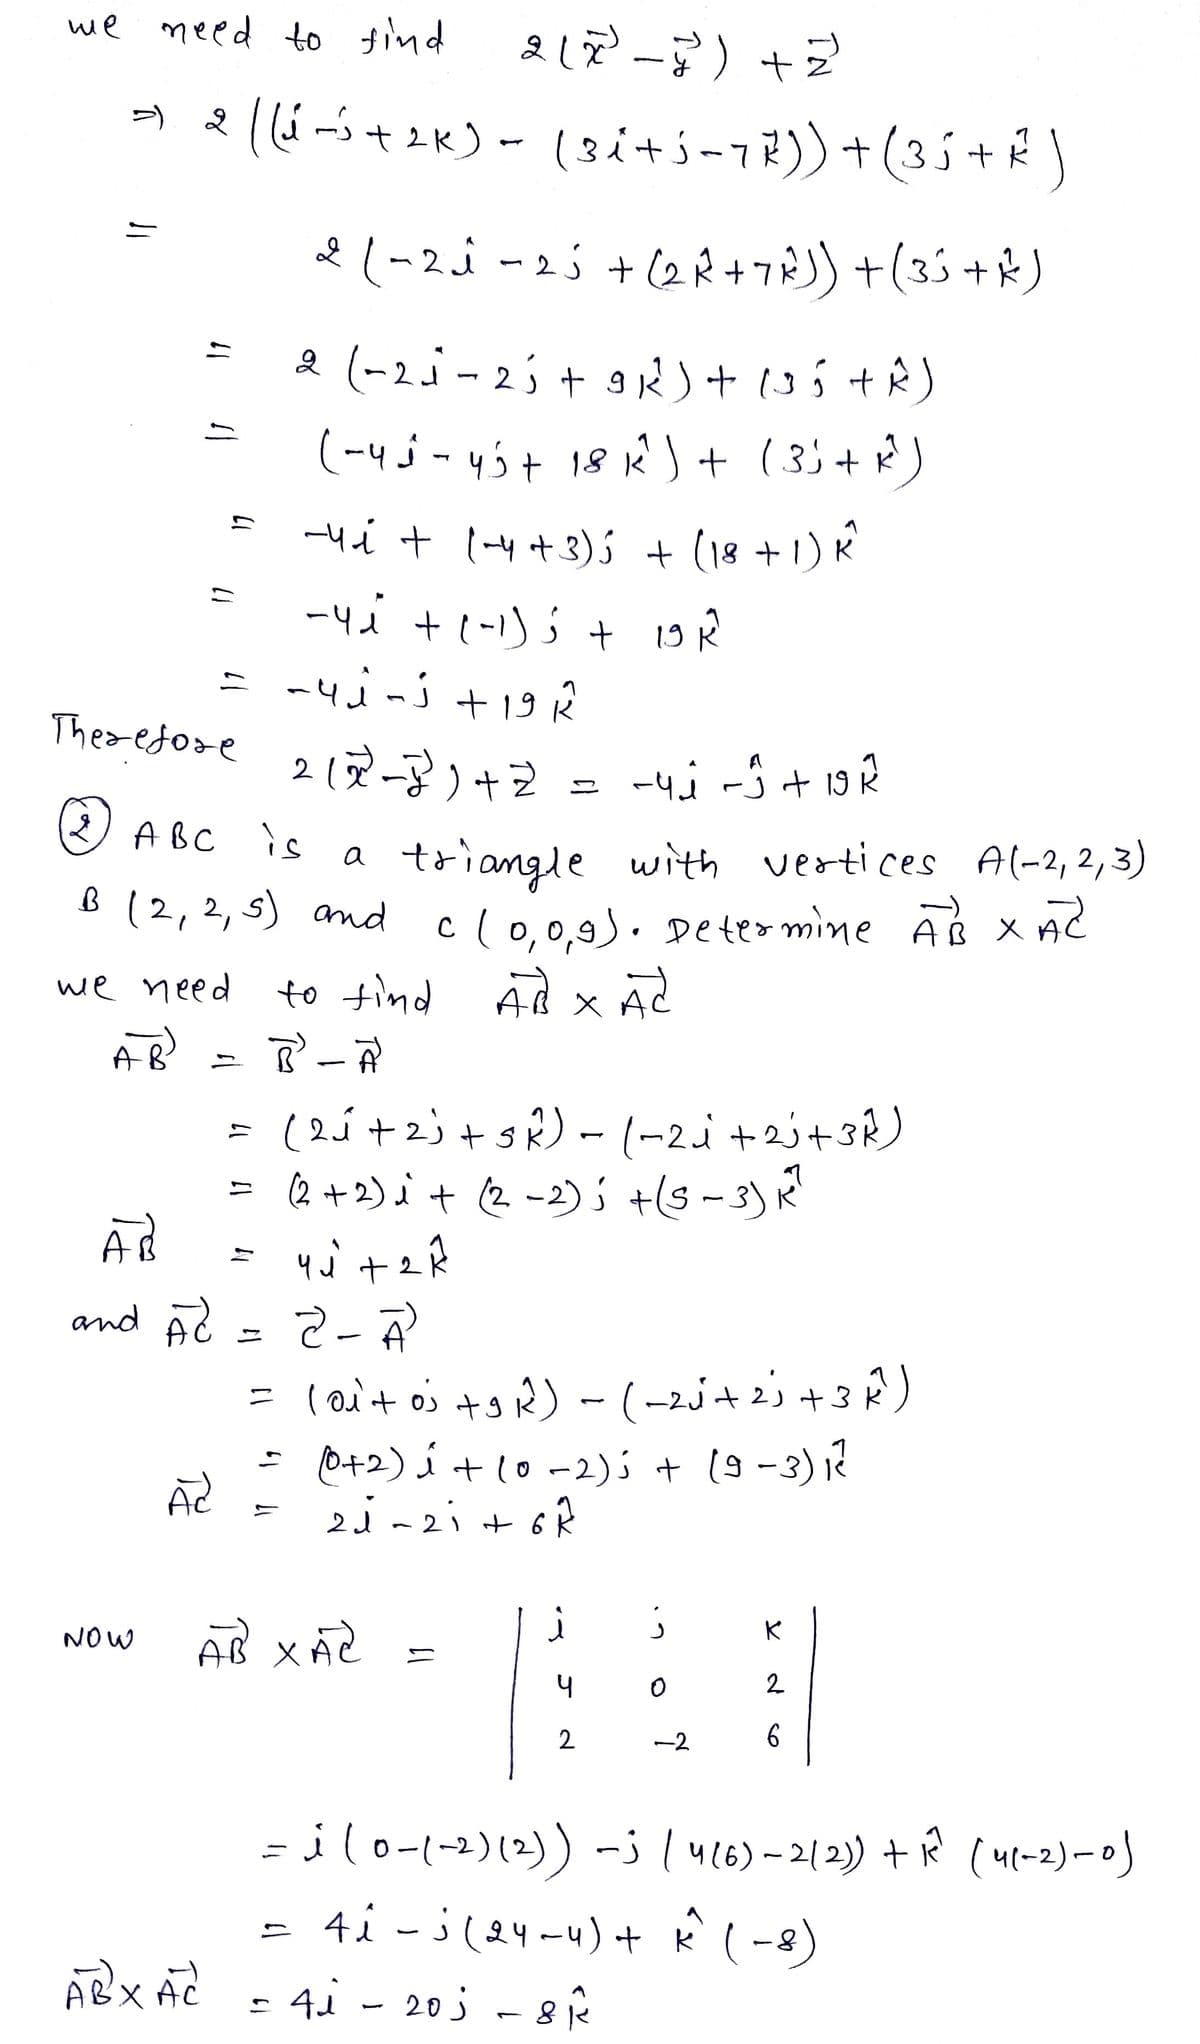 we need to find
11
11
NOW
AB
А
and AC
Therefore 212²-²) + Z
-чі -5 + 19 2
(2) ABC is
a
triangle with vertices A(-2,2,3)
B (2, 2, 5) and c(0,0,9). Determine ABXAZ
we need
to find AB X Ad
x
AB
B² - A
=
AC
ABX AC
2(x²-7²) +2²
((-³ + 2K) - (3i+5 − 7 7 ) ) + ( 3 5 + ² )
2 (-2₁ - 25+ (2R+7R)) +(35+ R)
2 (-21-25 + 9K²) + (3 5 + R)
(-45-45+ 18K²¹) + (3) + R²³)
-4-₁ + (-4+ 3) + (18+1)
-4 ₁² + (-1) 5 +
= −4j-j +19 R
(2√² + 2) + 5k) - (~2j+23+3R)
(2+2) i + (2-2); +(5-3) K²
=
yú tak
1
ÁP XÁC
=
2-A)
= (0₁+ oj +9R²) - (-2√² +2²3 +3K²)
(0+2) i + (0-2); + (9-3) ₁²
21-21 +6R
19 k
二
i
2
j
40
ช
K
2
6
=j (0-1-2) (2)) -3 | 4 (6) - 2/2)) + 1² (41-2)-0)
· 4i - i (24-4) + k^² (-8)
4₁-2018 1²